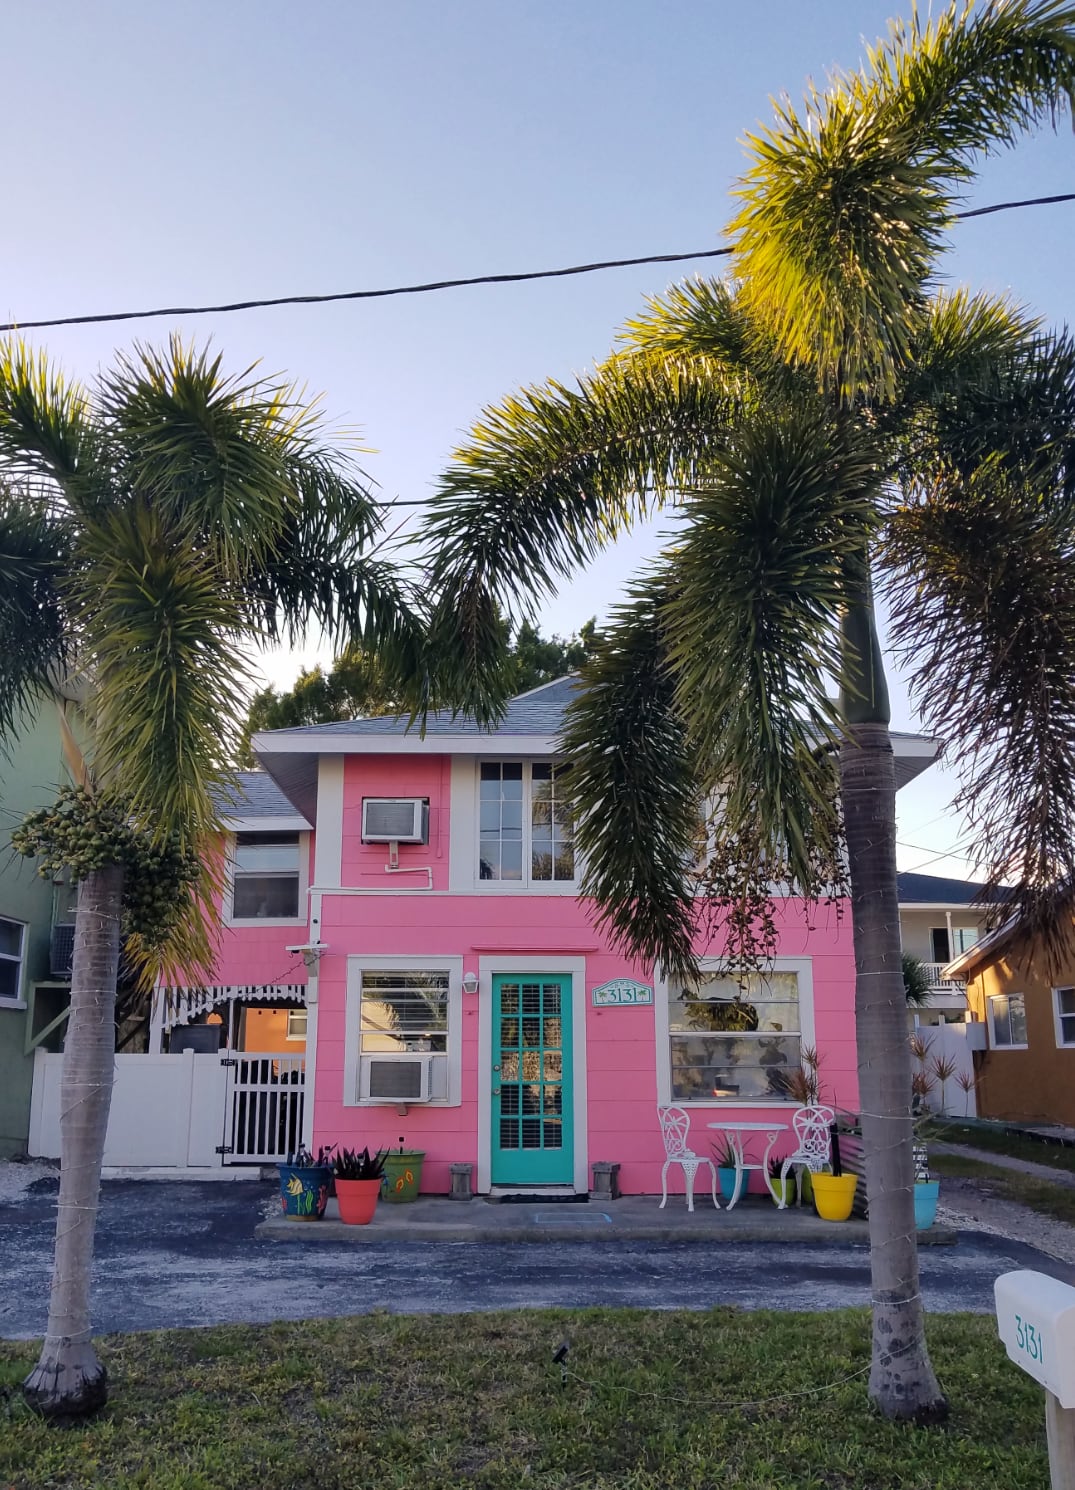 Cute two story pink house in Gulfport Florida